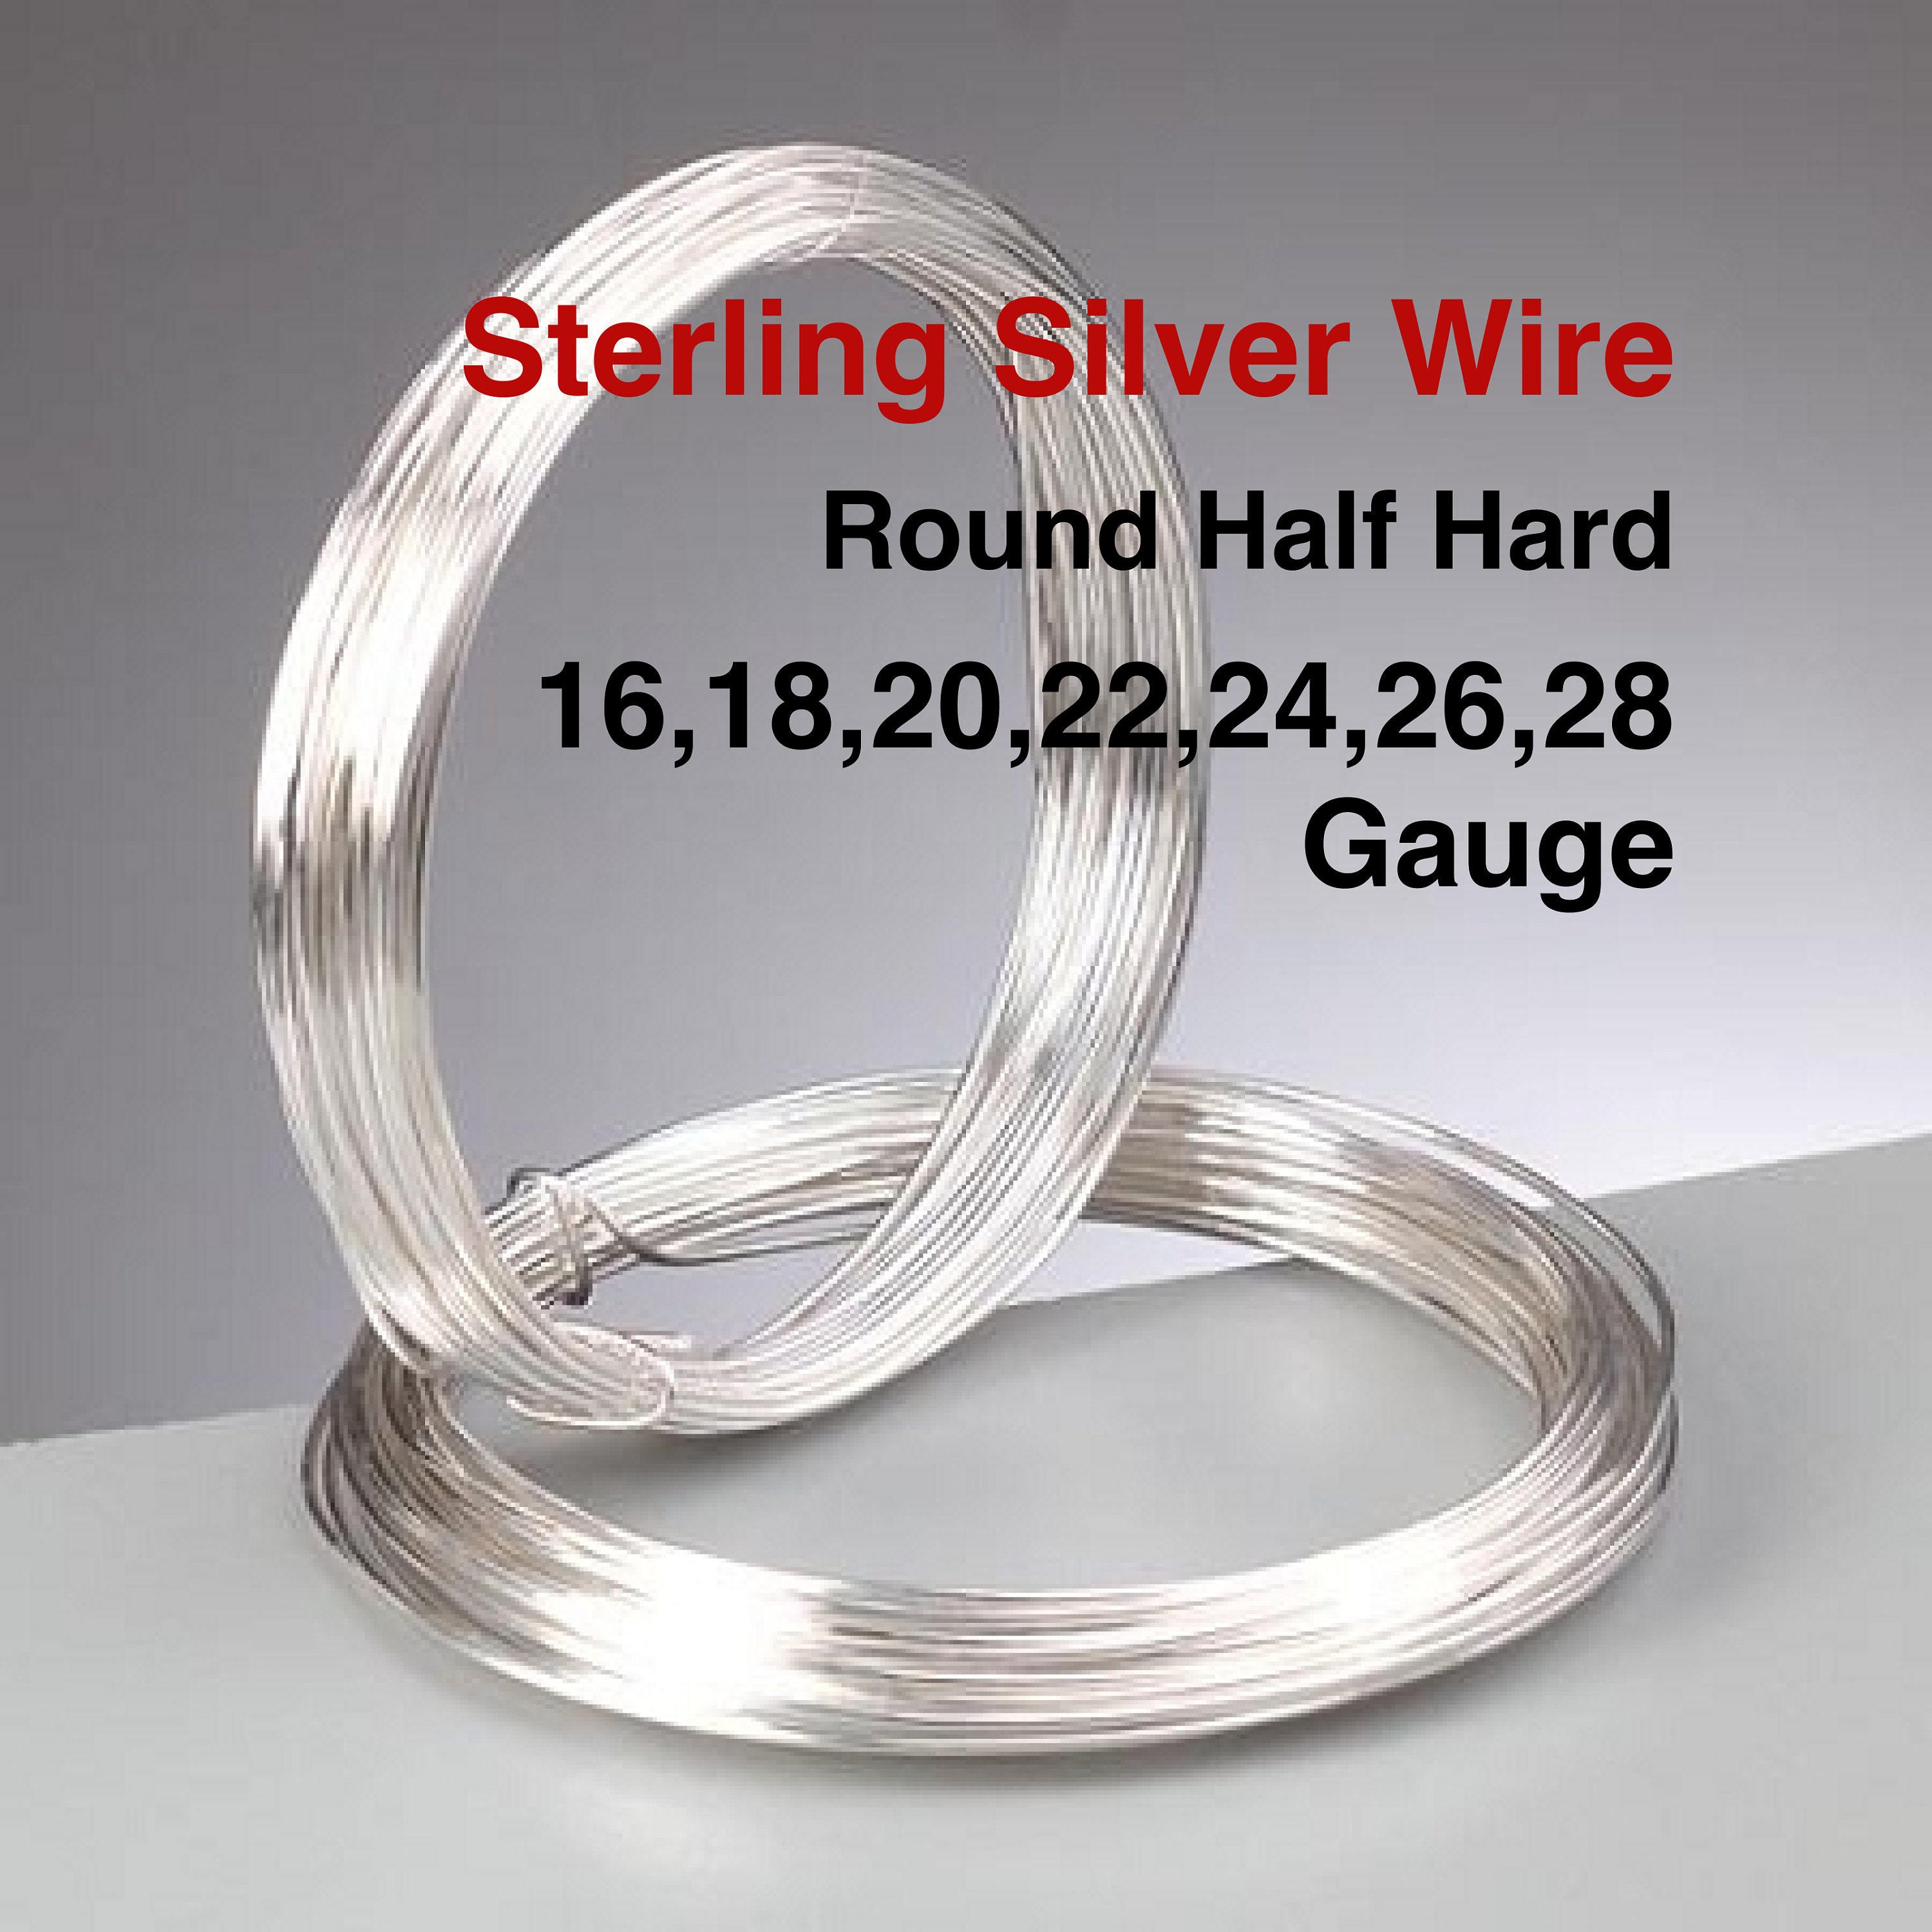 1 Meter 925 Sterling Silver Wire Jewelry Making  0.3/0.4/0.5/0.6/0.7/0.8/0.9/1/1.2mm Tarnish Resistant Silver Coil Wire